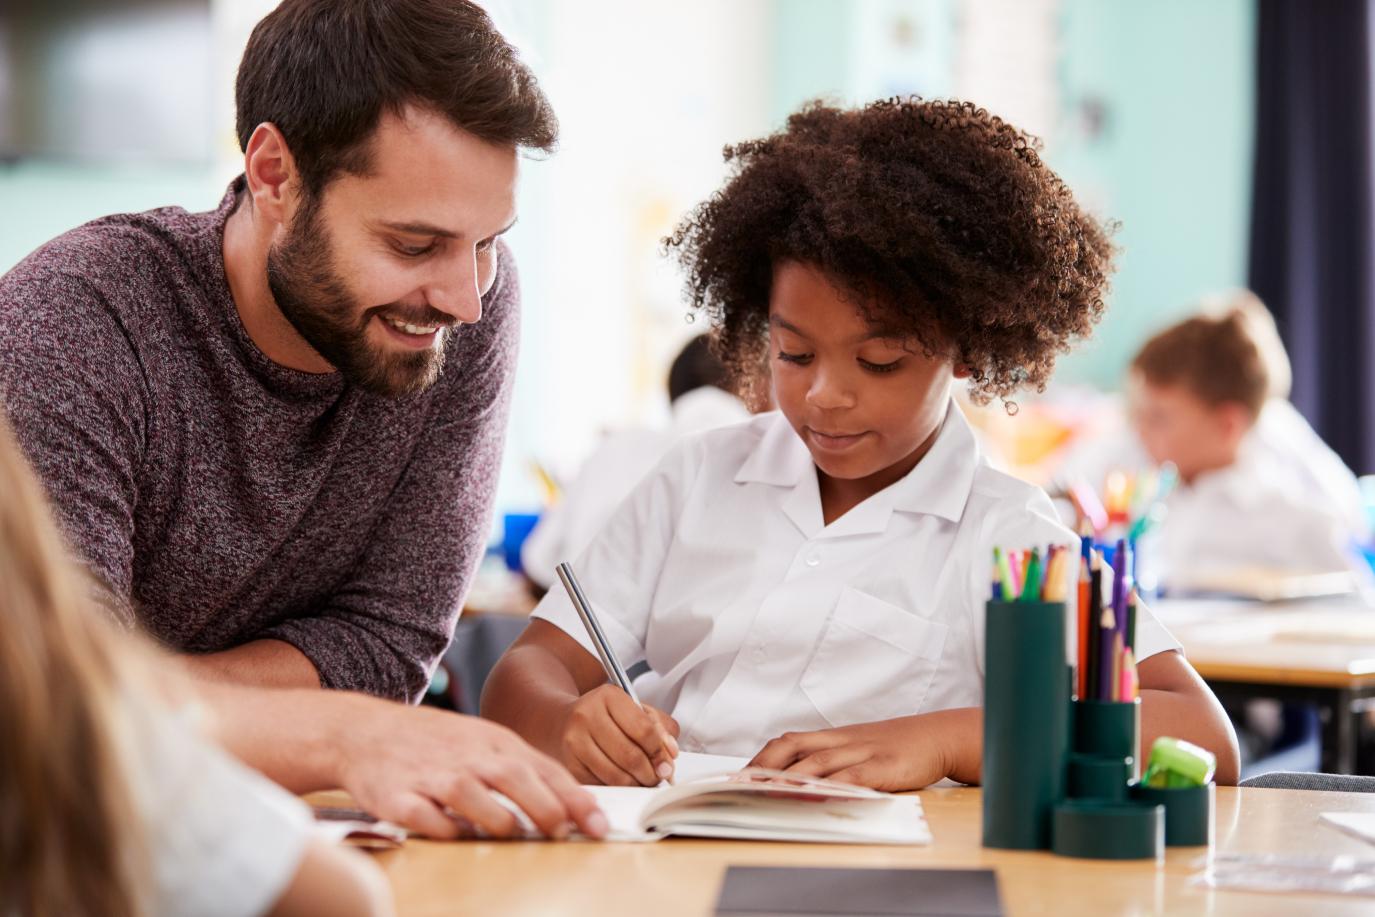 Young smiling male teacher sitting at a classroom table with a young schoolgirl who is writing in a notebook